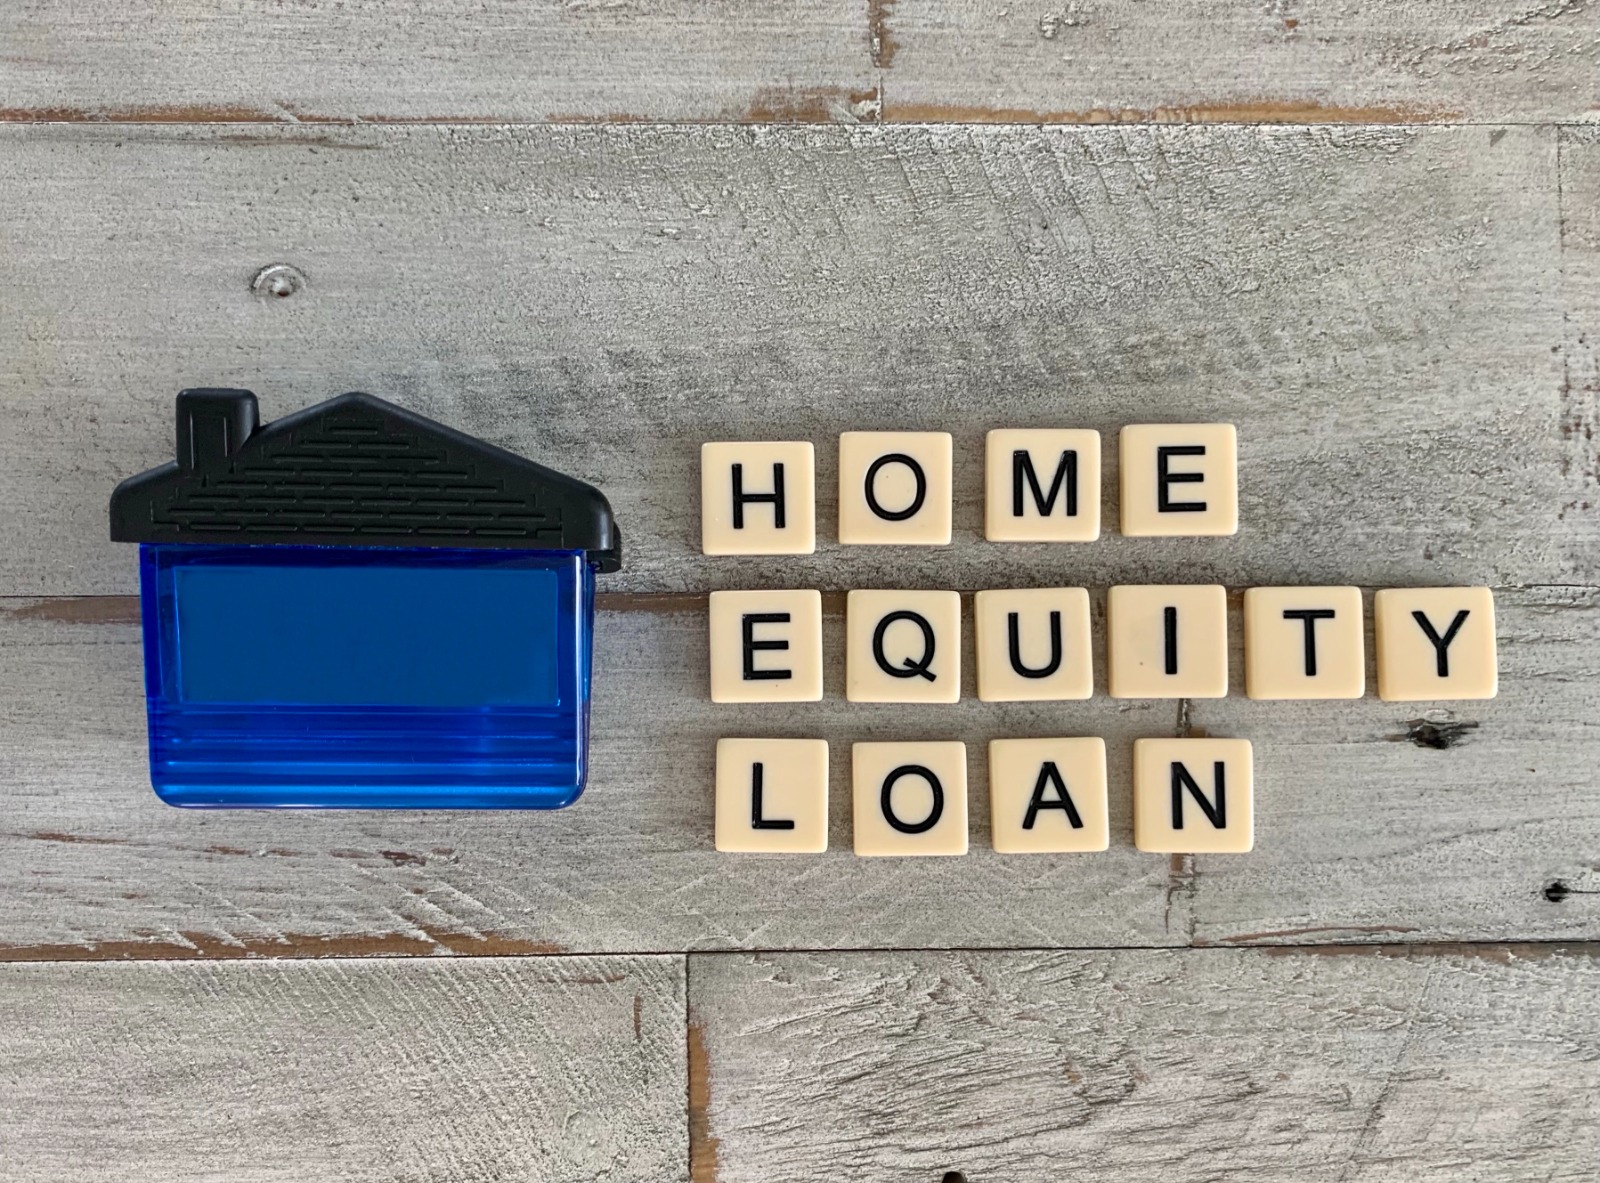 Can Home Equity Loan Be Tax Deductible in Canada